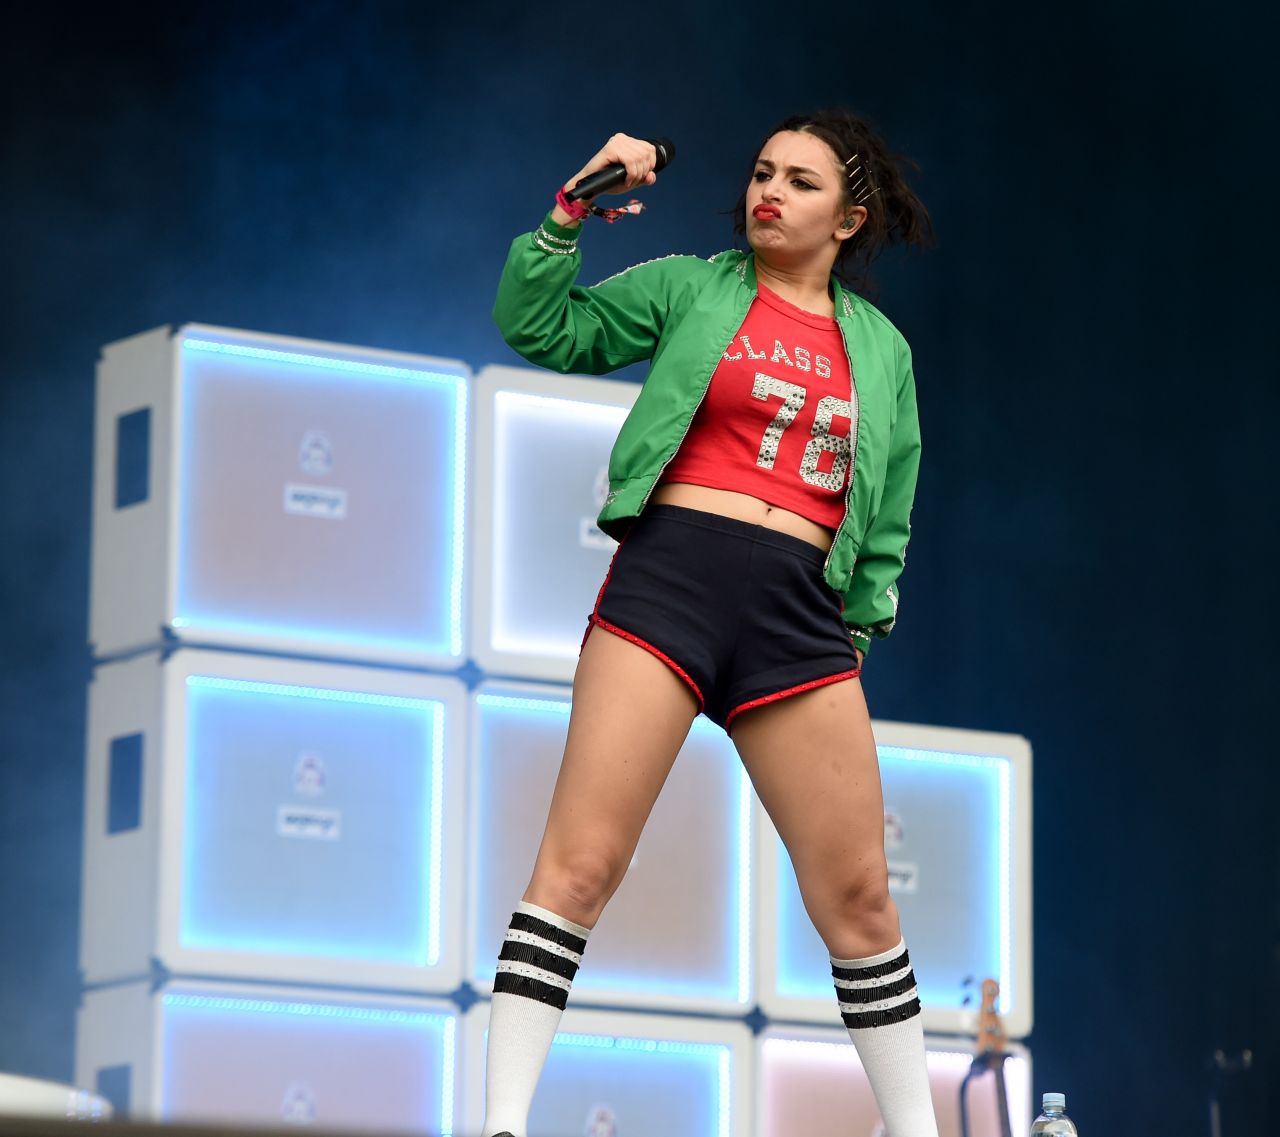 charli xcx performs at bestival on isle of wight september 2015